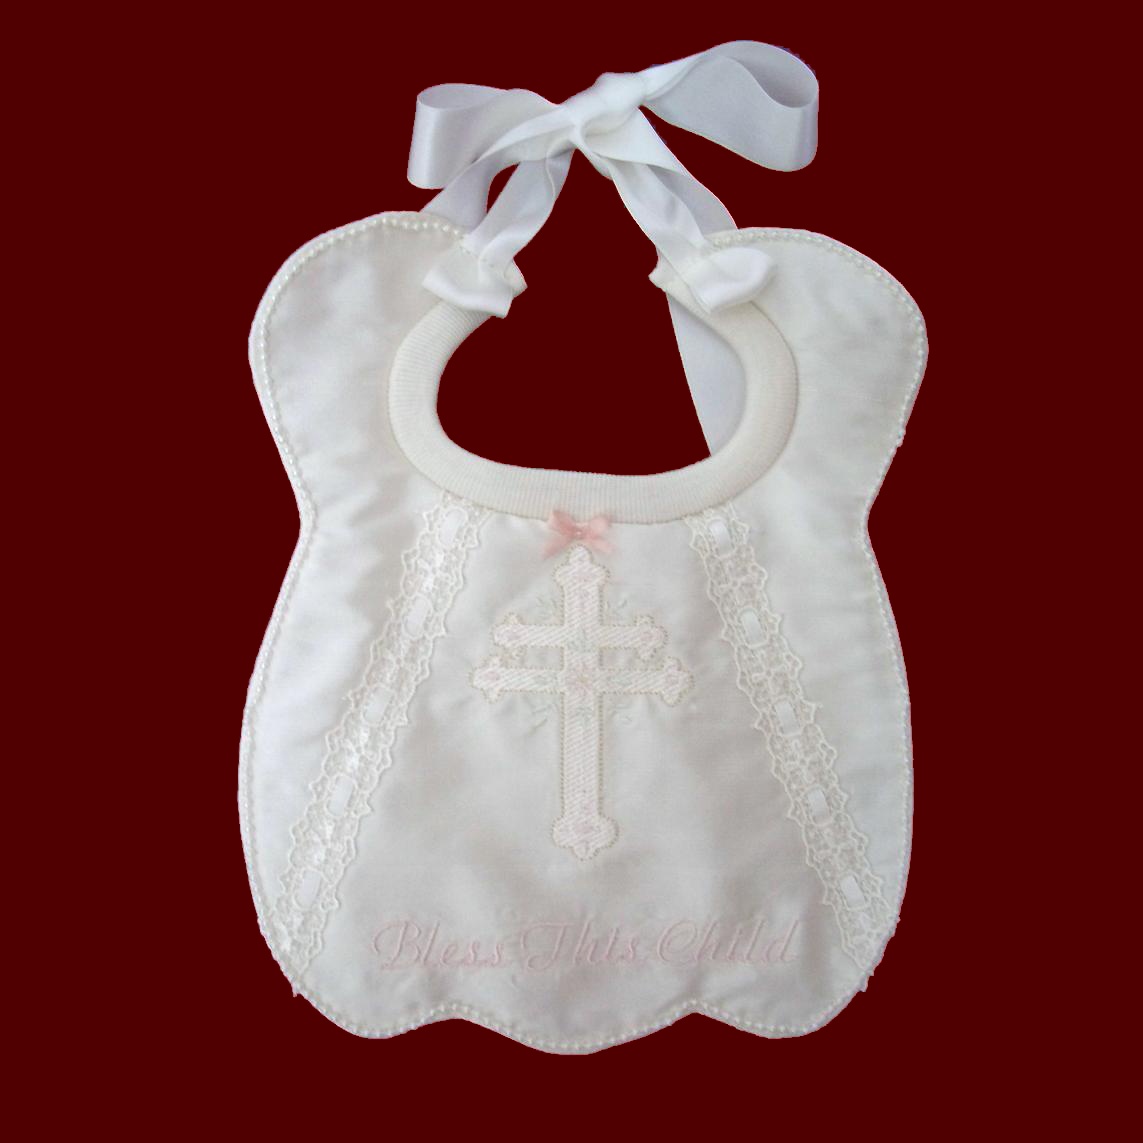 Bless This Child Bib With Pearls